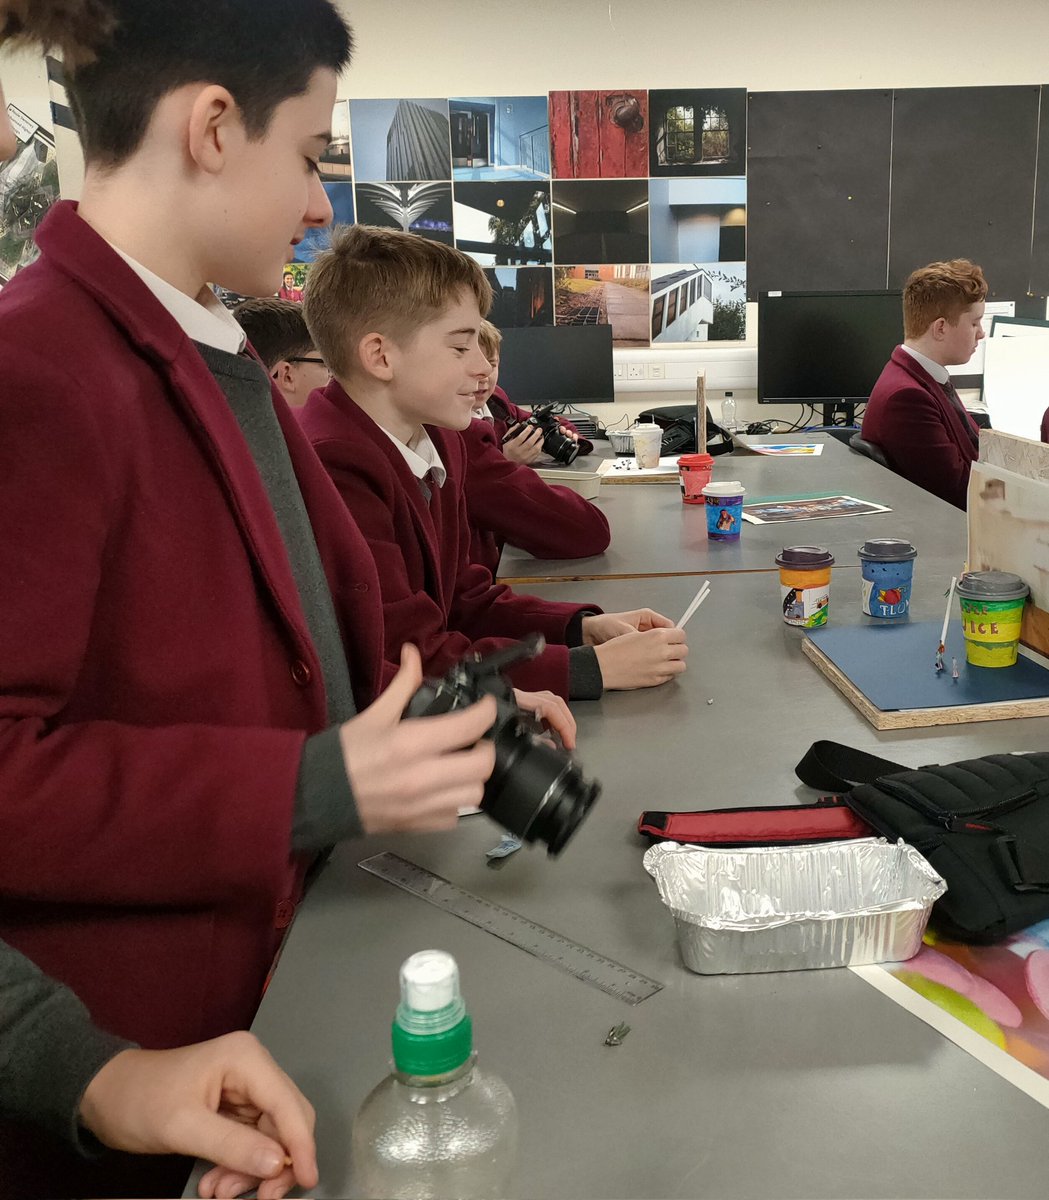 S2 Creative Industries have been working hard on their product design and photography unit, looking at composition, colour and scale with fantastic results 📸☕ @stninianshigh #creativeindustries #creativity